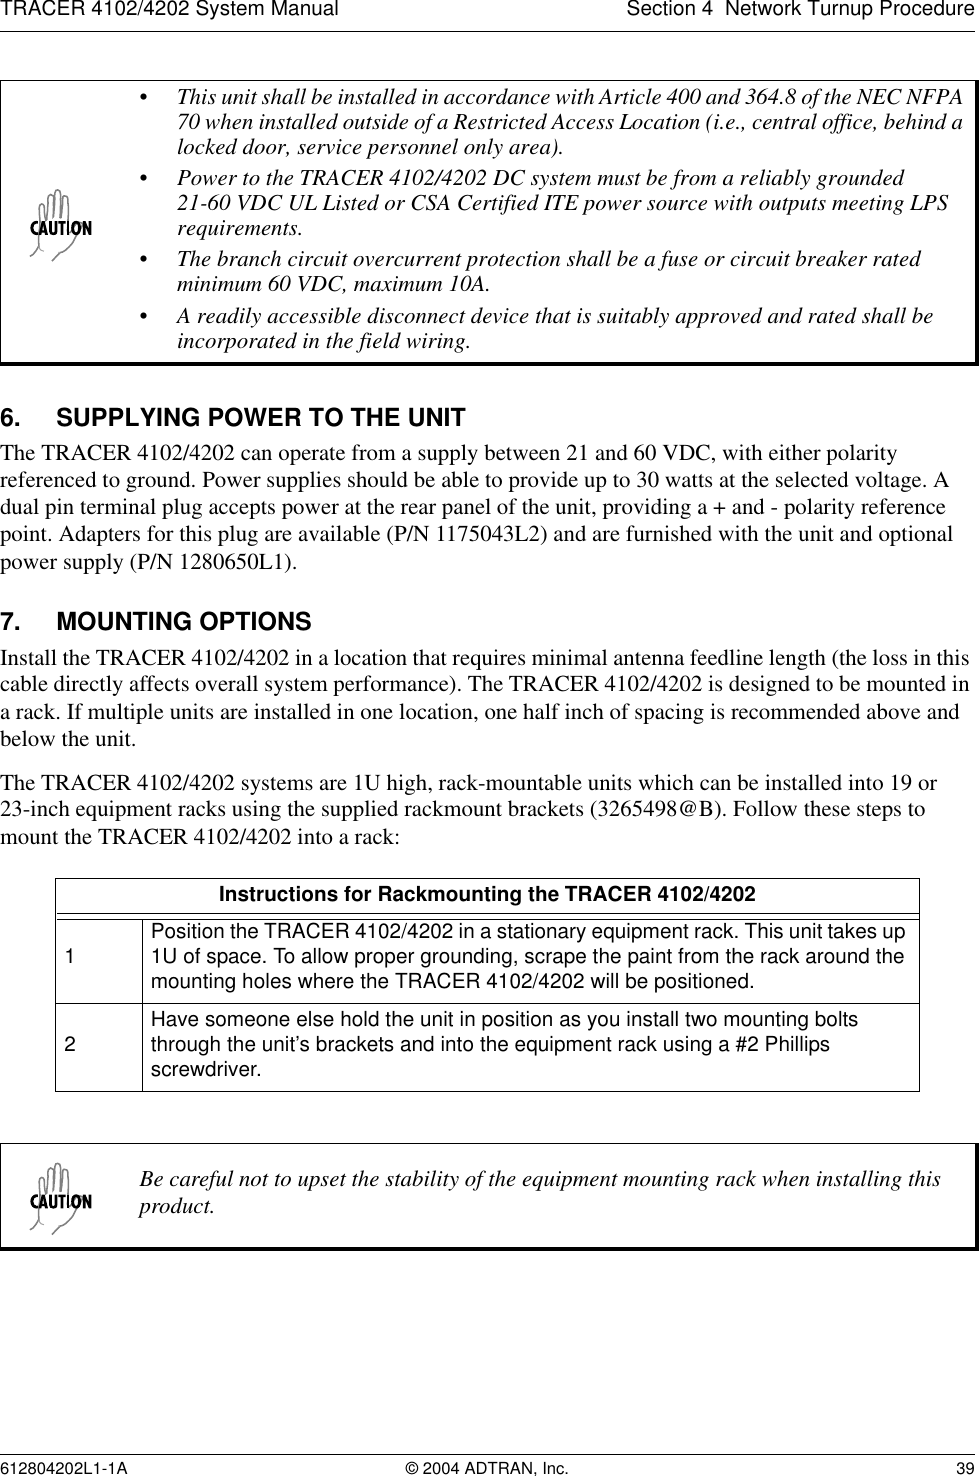 TRACER 4102/4202 System Manual Section 4  Network Turnup Procedure612804202L1-1A © 2004 ADTRAN, Inc. 396. SUPPLYING POWER TO THE UNITThe TRACER 4102/4202 can operate from a supply between 21 and 60 VDC, with either polarity referenced to ground. Power supplies should be able to provide up to 30 watts at the selected voltage. A dual pin terminal plug accepts power at the rear panel of the unit, providing a + and - polarity reference point. Adapters for this plug are available (P/N 1175043L2) and are furnished with the unit and optional power supply (P/N 1280650L1).7. MOUNTING OPTIONSInstall the TRACER 4102/4202 in a location that requires minimal antenna feedline length (the loss in this cable directly affects overall system performance). The TRACER 4102/4202 is designed to be mounted in a rack. If multiple units are installed in one location, one half inch of spacing is recommended above and below the unit.The TRACER 4102/4202 systems are 1U high, rack-mountable units which can be installed into 19 or 23-inch equipment racks using the supplied rackmount brackets (3265498@B). Follow these steps to mount the TRACER 4102/4202 into a rack:• This unit shall be installed in accordance with Article 400 and 364.8 of the NEC NFPA 70 when installed outside of a Restricted Access Location (i.e., central office, behind a locked door, service personnel only area).• Power to the TRACER 4102/4202 DC system must be from a reliably grounded 21-60 VDC UL Listed or CSA Certified ITE power source with outputs meeting LPS requirements.• The branch circuit overcurrent protection shall be a fuse or circuit breaker rated minimum 60 VDC, maximum 10A.• A readily accessible disconnect device that is suitably approved and rated shall be incorporated in the field wiring.Instructions for Rackmounting the TRACER 4102/42021Position the TRACER 4102/4202 in a stationary equipment rack. This unit takes up 1U of space. To allow proper grounding, scrape the paint from the rack around the mounting holes where the TRACER 4102/4202 will be positioned.2Have someone else hold the unit in position as you install two mounting bolts through the unit’s brackets and into the equipment rack using a #2 Phillips screwdriver.Be careful not to upset the stability of the equipment mounting rack when installing this product.